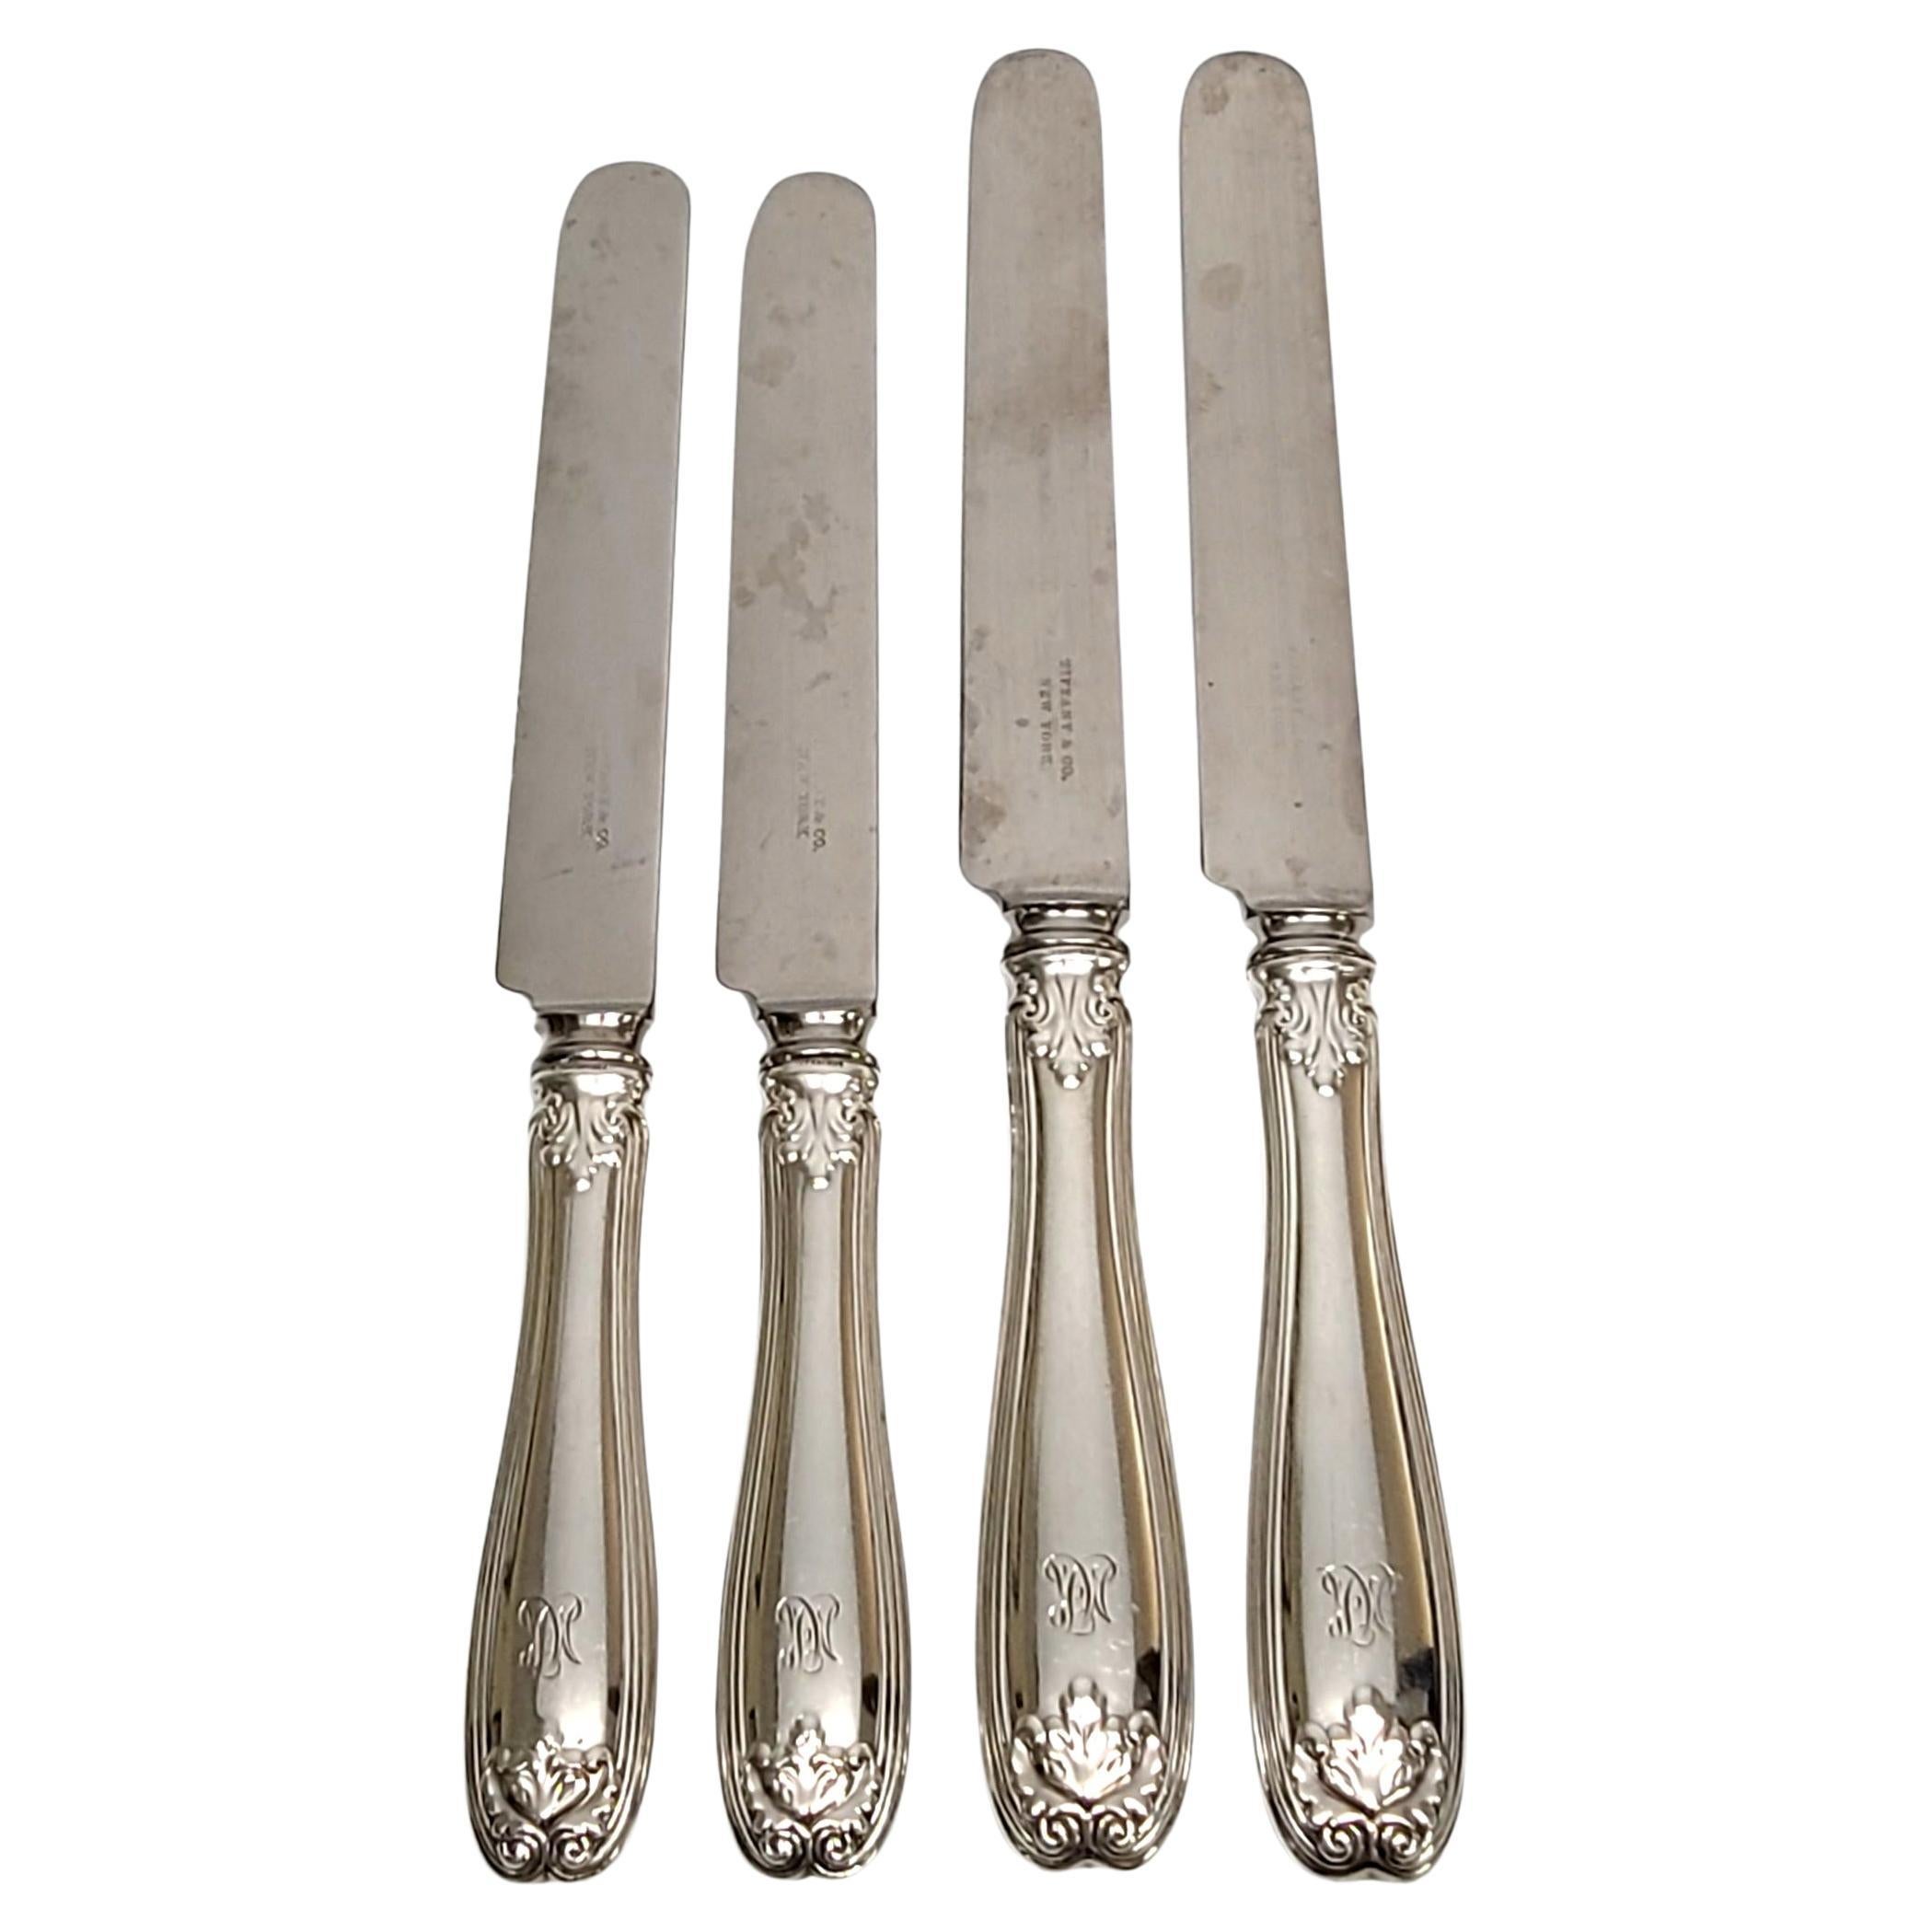 Set of 4 Tiffany & Co Sterling Silver Colonial Knives with Monogram For Sale